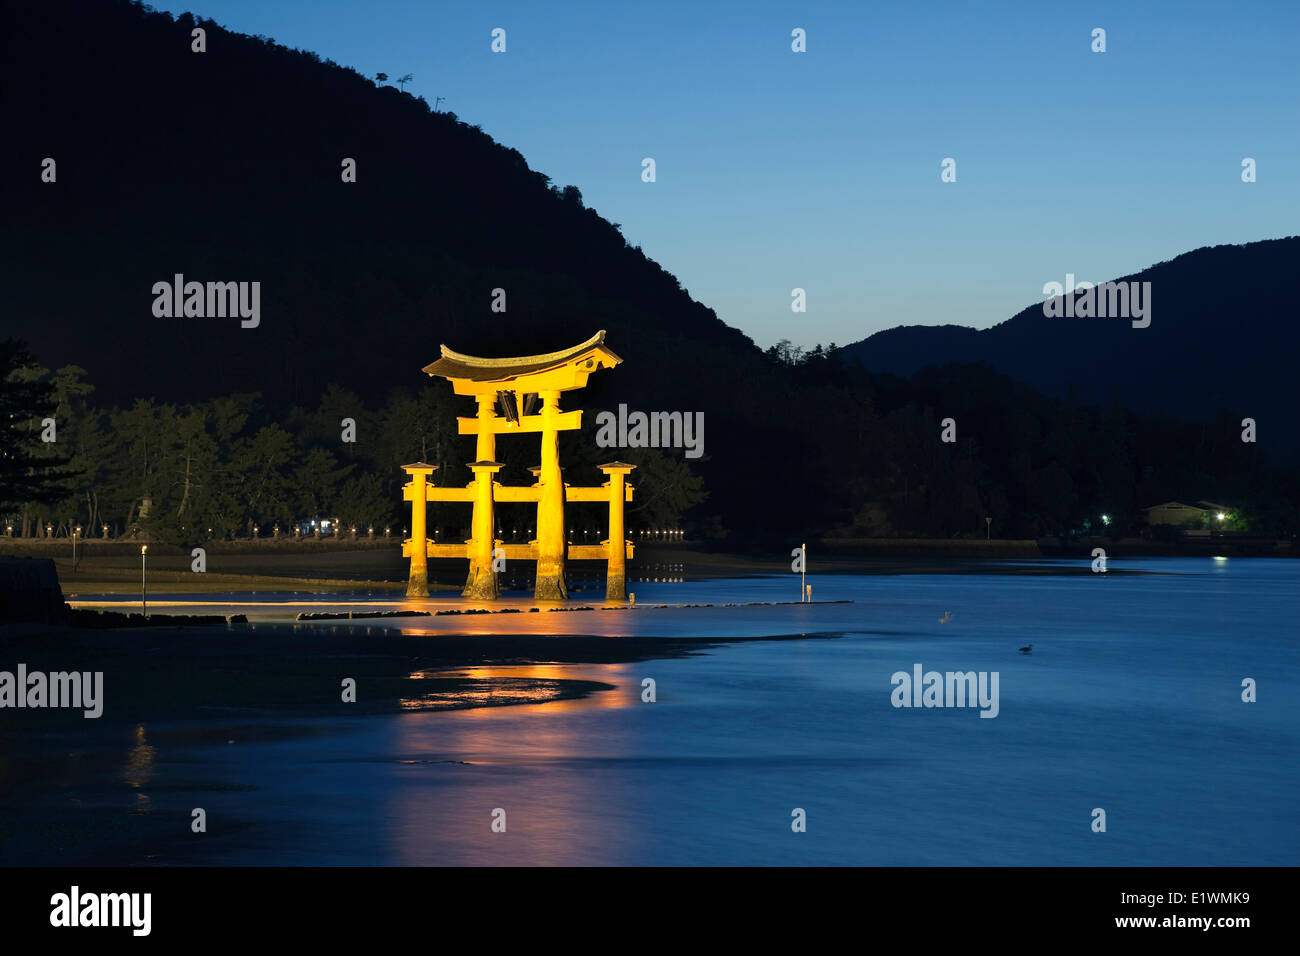 Nightime scene of the giant torii gate that is part of the Itsukushima Shrine complex on the island of Miyajima, Japan. Stock Photo